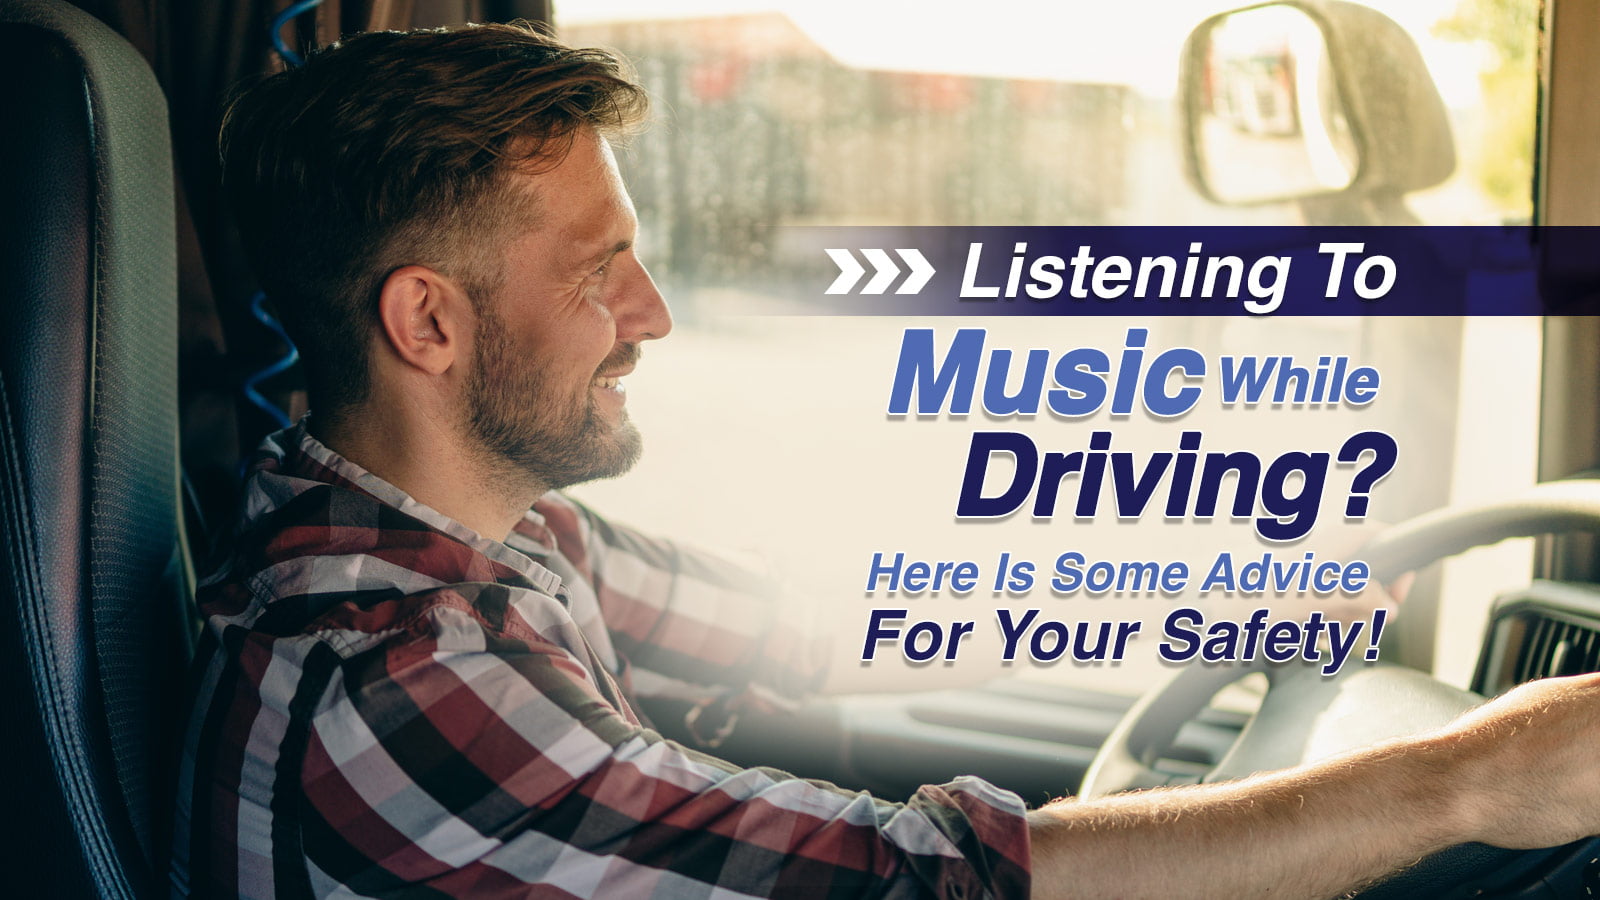 Listening to music while driving. Here is some advice for your safety!